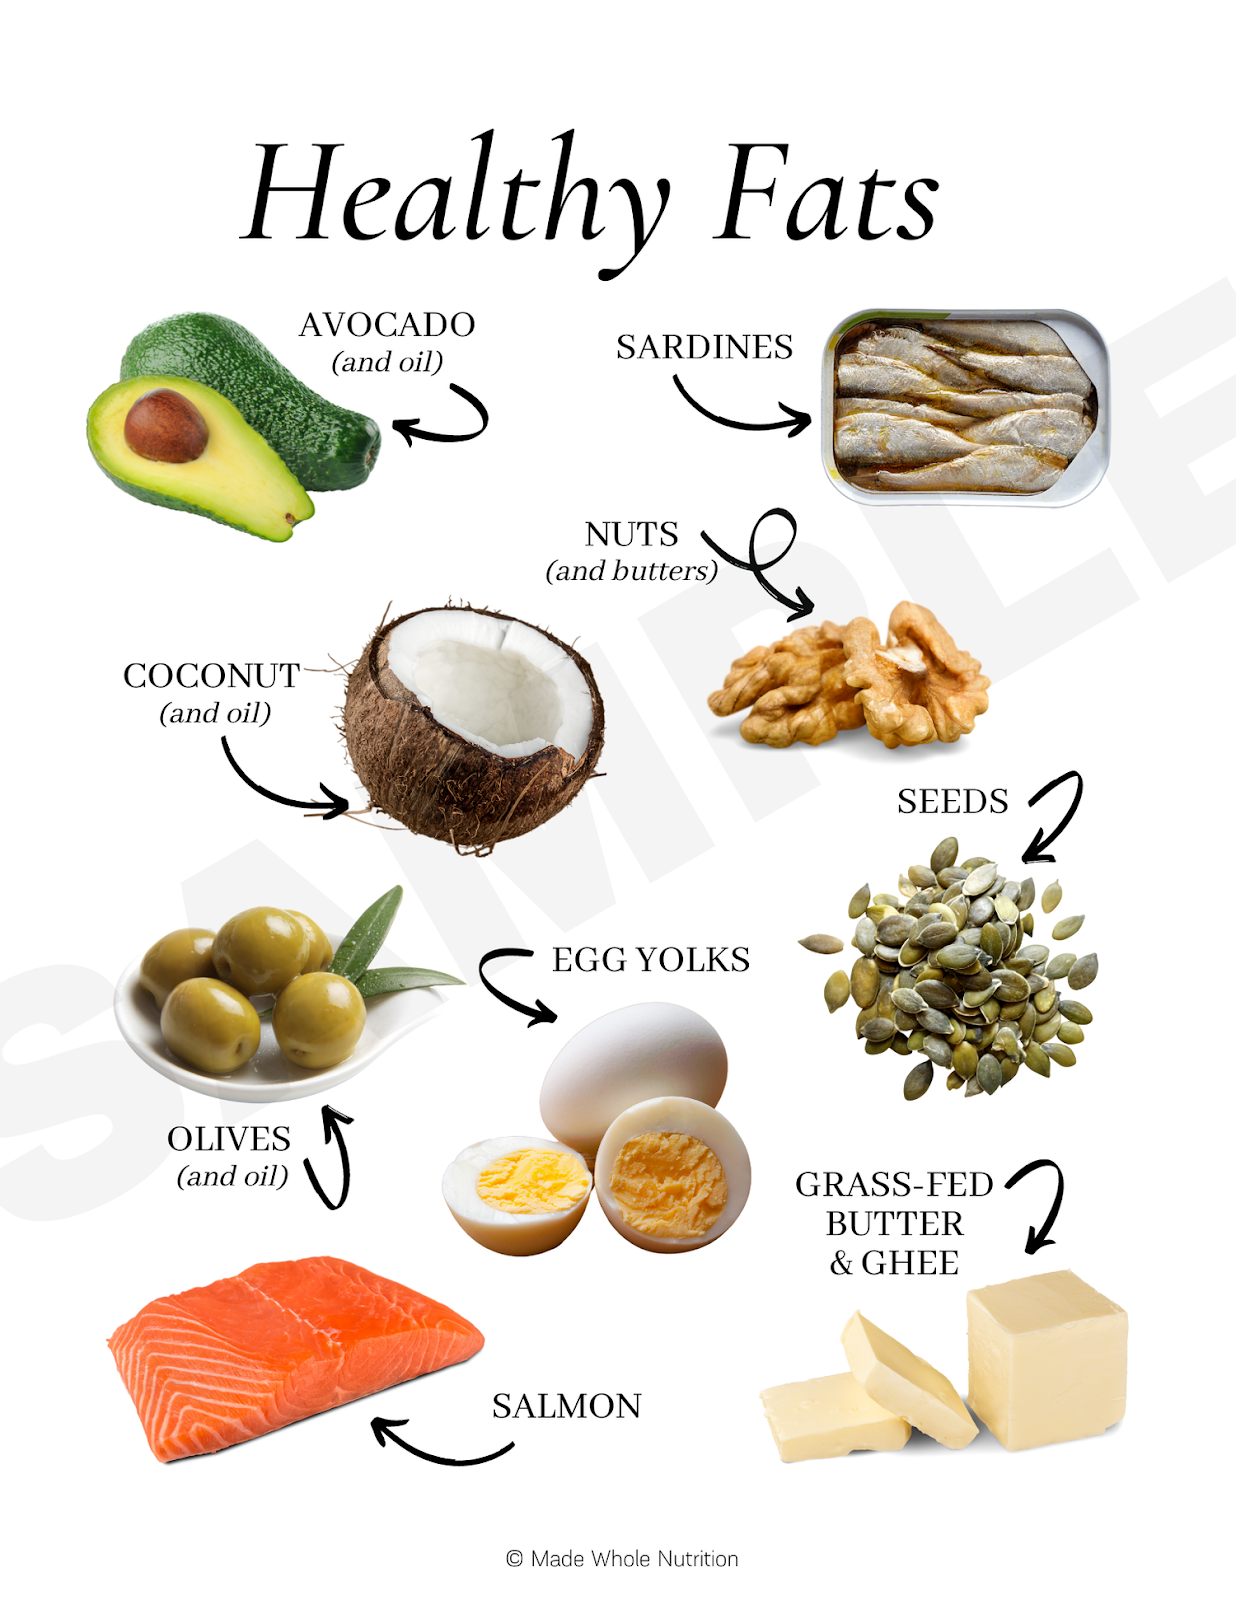 Healthy Fats: The Key to a Balanced Diet
Are you looking for ways to improve your diet and overall health? Look no further than healthy fats! Contrary to popular belief, not all fats are bad for you. In fact, some fats are essential for maintaining good health. In this article, we’ll explore the benefits of healthy fats and provide you with some delicious recipes to help you incorporate them into your diet.

Avocado Toast
Avocado toast is a delicious and healthy breakfast option that’s packed with healthy fats. Simply toast a slice of whole-grain bread, mash up half an avocado, and spread it on top of the toast. Sprinkle with salt and pepper to taste, and enjoy!
Nutritional Content of Basic Avocado Toast (per serving):
Calories: Approximately 200-250 calories
Fat: Approximately 15-20 grams (mainly healthy monounsaturated fats)
Carbohydrates: Approximately 15-20 grams
Dietary Fiber: Approximately 5-7 grams
Protein: Approximately 3-5 grams
Vitamins and Minerals: Avocado is a good source of vitamins and minerals, including potassium, vitamin K, vitamin E, vitamin C, and B vitamins.

Avocado Toast
It's important to note that the specific nutritional content may vary depending on factors such as the type of bread used (whole grain, sourdough, etc.), the amount of avocado spread, and any additional toppings or seasonings.
As for dishes that feature Avocado Toast, here are a few popular variations:
Classic Avocado Toast: The basic version, which typically includes mashed avocado spread on toasted bread, is seasoned with salt, pepper, and optional toppings like red pepper flakes or lemon juice.
Avocado Toast with Poached Egg: A favorite breakfast or brunch option, where a poached or fried egg is placed on top of the avocado spread, often garnished with herbs and spices.
Smashed Avocado Toast: Similar to the classic version but with the avocado roughly smashed for a chunkier texture.
Avocado Toast with Smoked Salmon: This savory option combines creamy avocado with smoked salmon, capers, and red onion for a delightful and nutritious meal.
Vegan Avocado Toast: A plant-based version that may include avocado spread, roasted tomatoes, sautéed spinach, or other vegan-friendly toppings.
Avocado Toast with Bacon: For those who enjoy a savory and slightly indulgent twist, crispy bacon can be added to the avocado toast.
Avocado Toast with Microgreens: A healthy and colorful option featuring a variety of microgreens, which are packed with nutrients and add a fresh, peppery flavor.
Salmon Salad
Salmon is an excellent source of healthy omega-3 fatty acids. To make a delicious salmon salad, simply mix together some cooked salmon, chopped vegetables like cucumber and tomato, and a drizzle of olive oil. Serve over a bed of greens for a healthy and satisfying lunch.

Salmon Salad
Nutritional Values for a Typical Salmon Salad (Approximately 1 cup or 150 grams):
Calories: Approximately 250-300 calories
Protein: Approximately 20-25 grams
Fat: Approximately 15-20 grams (mainly from the salmon and any added dressing)
Carbohydrates: Approximately 5-10 grams (mainly from vegetables and any added ingredients)
Fiber: 2-4 grams (mainly from vegetables and greens)
Saturated Fat: About 2-3 grams (varies based on ingredients)
Cholesterol: Approximately 40-60 milligrams (mainly from the salmon)
Sodium: Approximately 300-500 milligrams (varies based on ingredients and dressings)
Vitamins: Salmon is a good source of vitamins such as vitamin D, vitamin B12, and vitamin B6. The vegetables in the salad contribute vitamins like vitamin A, vitamin C, and vitamin K.
Minerals: Salmon provides minerals like selenium and phosphorus. Vegetables can add minerals such as potassium and folate.
Omega-3 Fatty Acids: Salmon is rich in omega-3 fatty acids, which are beneficial for heart health and brain function
Peanut Butter Banana Smoothie
Peanut butter is another great source of healthy fats. To make a delicious peanut butter banana smoothie, simply blend together some peanut butter, banana, almond milk, and ice. This smoothie is perfect for breakfast or as a mid-day snack.

Peanut Butter Banana Smoothie
Nutritional Values for a Peanut Butter Banana Smoothie (Serving Size: 1 smoothie (about 12-16 ounces)):
Calories: Approximately 300-400 calories
Protein: 8-12 grams
Fiber: 4-6 grams
Fat: 10-15 grams (mainly from peanut butter)
Carbohydrates: 40-50 grams (mainly from bananas and any added sweeteners)
Sugar: 15-25 grams (naturally occurring sugars from bananas and any added sweeteners)
Vitamins and Minerals: The smoothie is a good source of potassium, vitamin C, vitamin B6, and folate due to the bananas. Peanut butter contributes healthy fats, protein, and vitamin E.
Dark Chocolate Bark
Dark chocolate is loaded with healthy antioxidants and fats. To make a delicious dark chocolate bark, simply melt some dark chocolate in the microwave or on the stove. Add in some chopped nuts or dried fruit if desired, and spread the mixture out on a baking sheet. Allow to cool in the fridge for at least an hour before breaking into pieces.

Dark Chocolate Bark
Here's a general overview of the typical nutritional content for a 1-ounce (28-gram) serving of dark chocolate bark:
Calories: Approximately 150-170 calories
Fat: Approximately 10-12 grams
Saturated Fat: Approximately 6-7 grams
Carbohydrates: Approximately 15-18 grams
Dietary Fiber: Approximately 2-3 grams
Sugars: Approximately 10-12 grams
Protein: Approximately 1-2 grams
Iron: Approximately 10-15% of the Daily Value (DV) based on a 2,000-calorie diet
Potassium: Approximately 150-200 milligrams
Magnesium: Approximately 15-20% of the DV based on a 2,000-calorie diet
Conclusion
Healthy fats are an essential component of a balanced diet. They offer a wide range of benefits, including supporting heart health, aiding in nutrient absorption, and providing a source of long-lasting energy. Incorporating sources of healthy fats like avocados, nuts, seeds, and fatty fish into your meals can contribute to overall well-being and help you maintain a more balanced and nutritious diet.
Call to Action
It's important to remember that moderation is key, as even healthy fats are calorie-dense. Balancing your fat intake with other macronutrients, such as carbohydrates and protein, is essential for optimal health. By making mindful choices and prioritizing healthy fats, you can enhance the quality of your diet and promote a healthier, more vibrant life.
Follow us to see more useful information, as well as to give us more motivation to update more useful information for you.
#healthyfats #balanceddiet #healthylifestyle #cleaneating #foodie.

